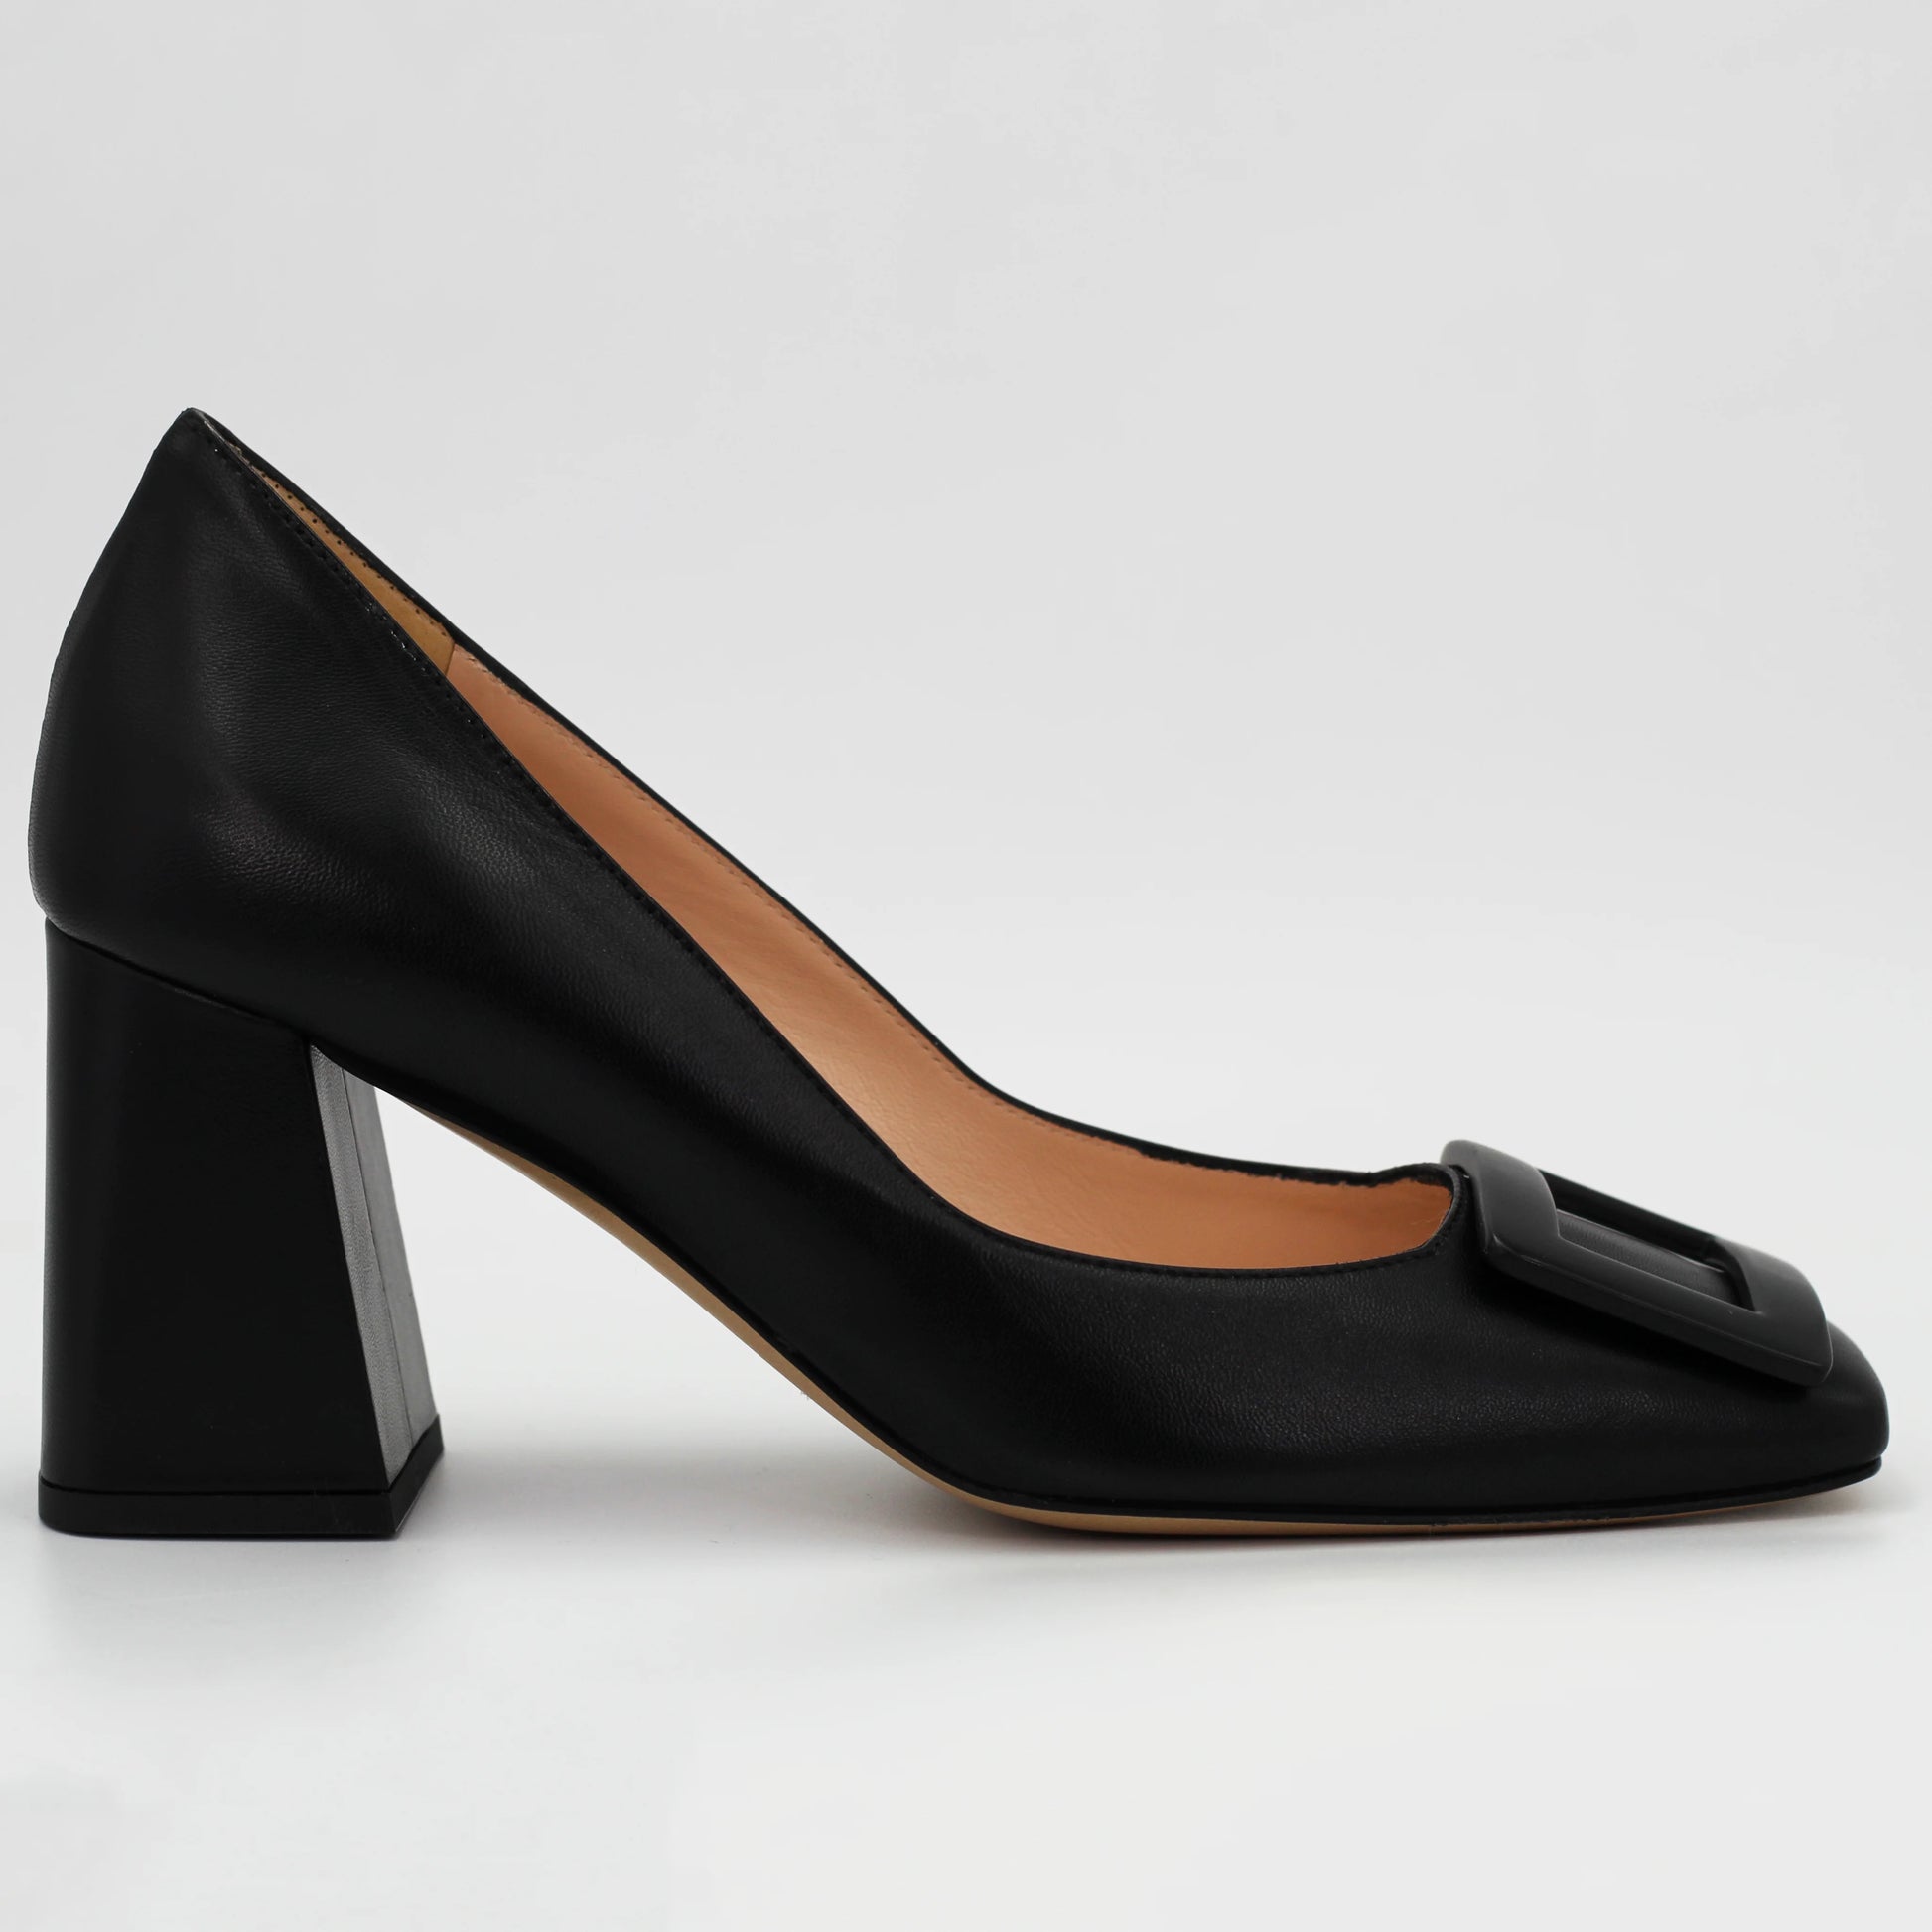 Shop Handmade Italian Leather block heel in black (MP1710) or browse our range of hand-made Italian shoes in leather or suede in-store at Aliverti Cape Town, or shop online. We deliver in South Africa & offer multiple payment plans as well as accept multiple safe & secure payment methods.